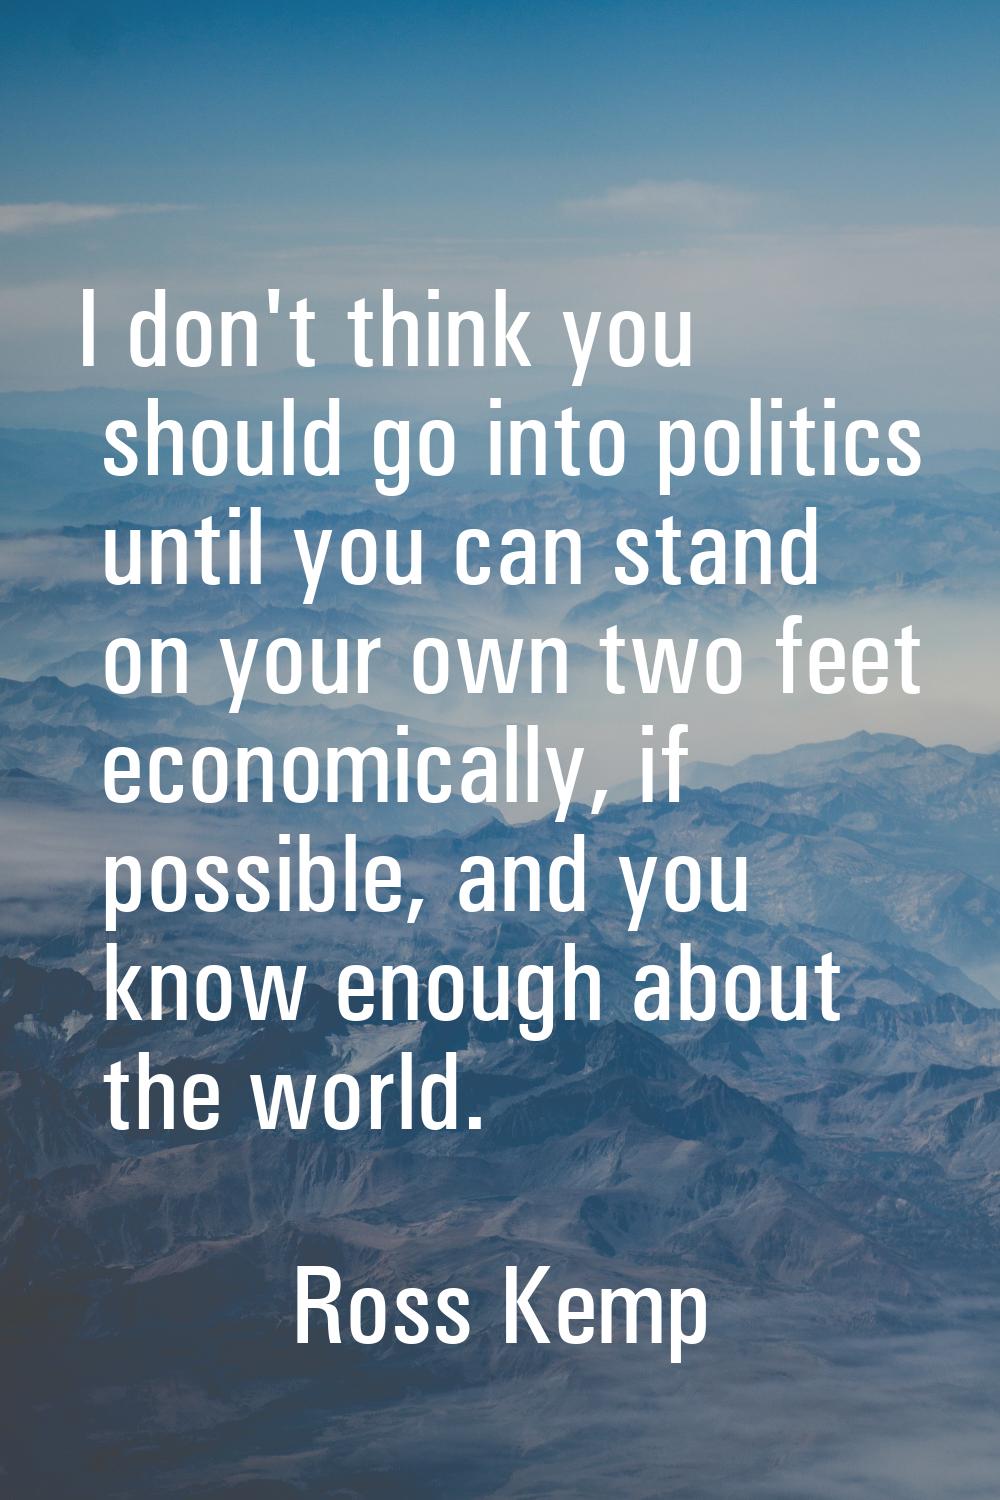 I don't think you should go into politics until you can stand on your own two feet economically, if